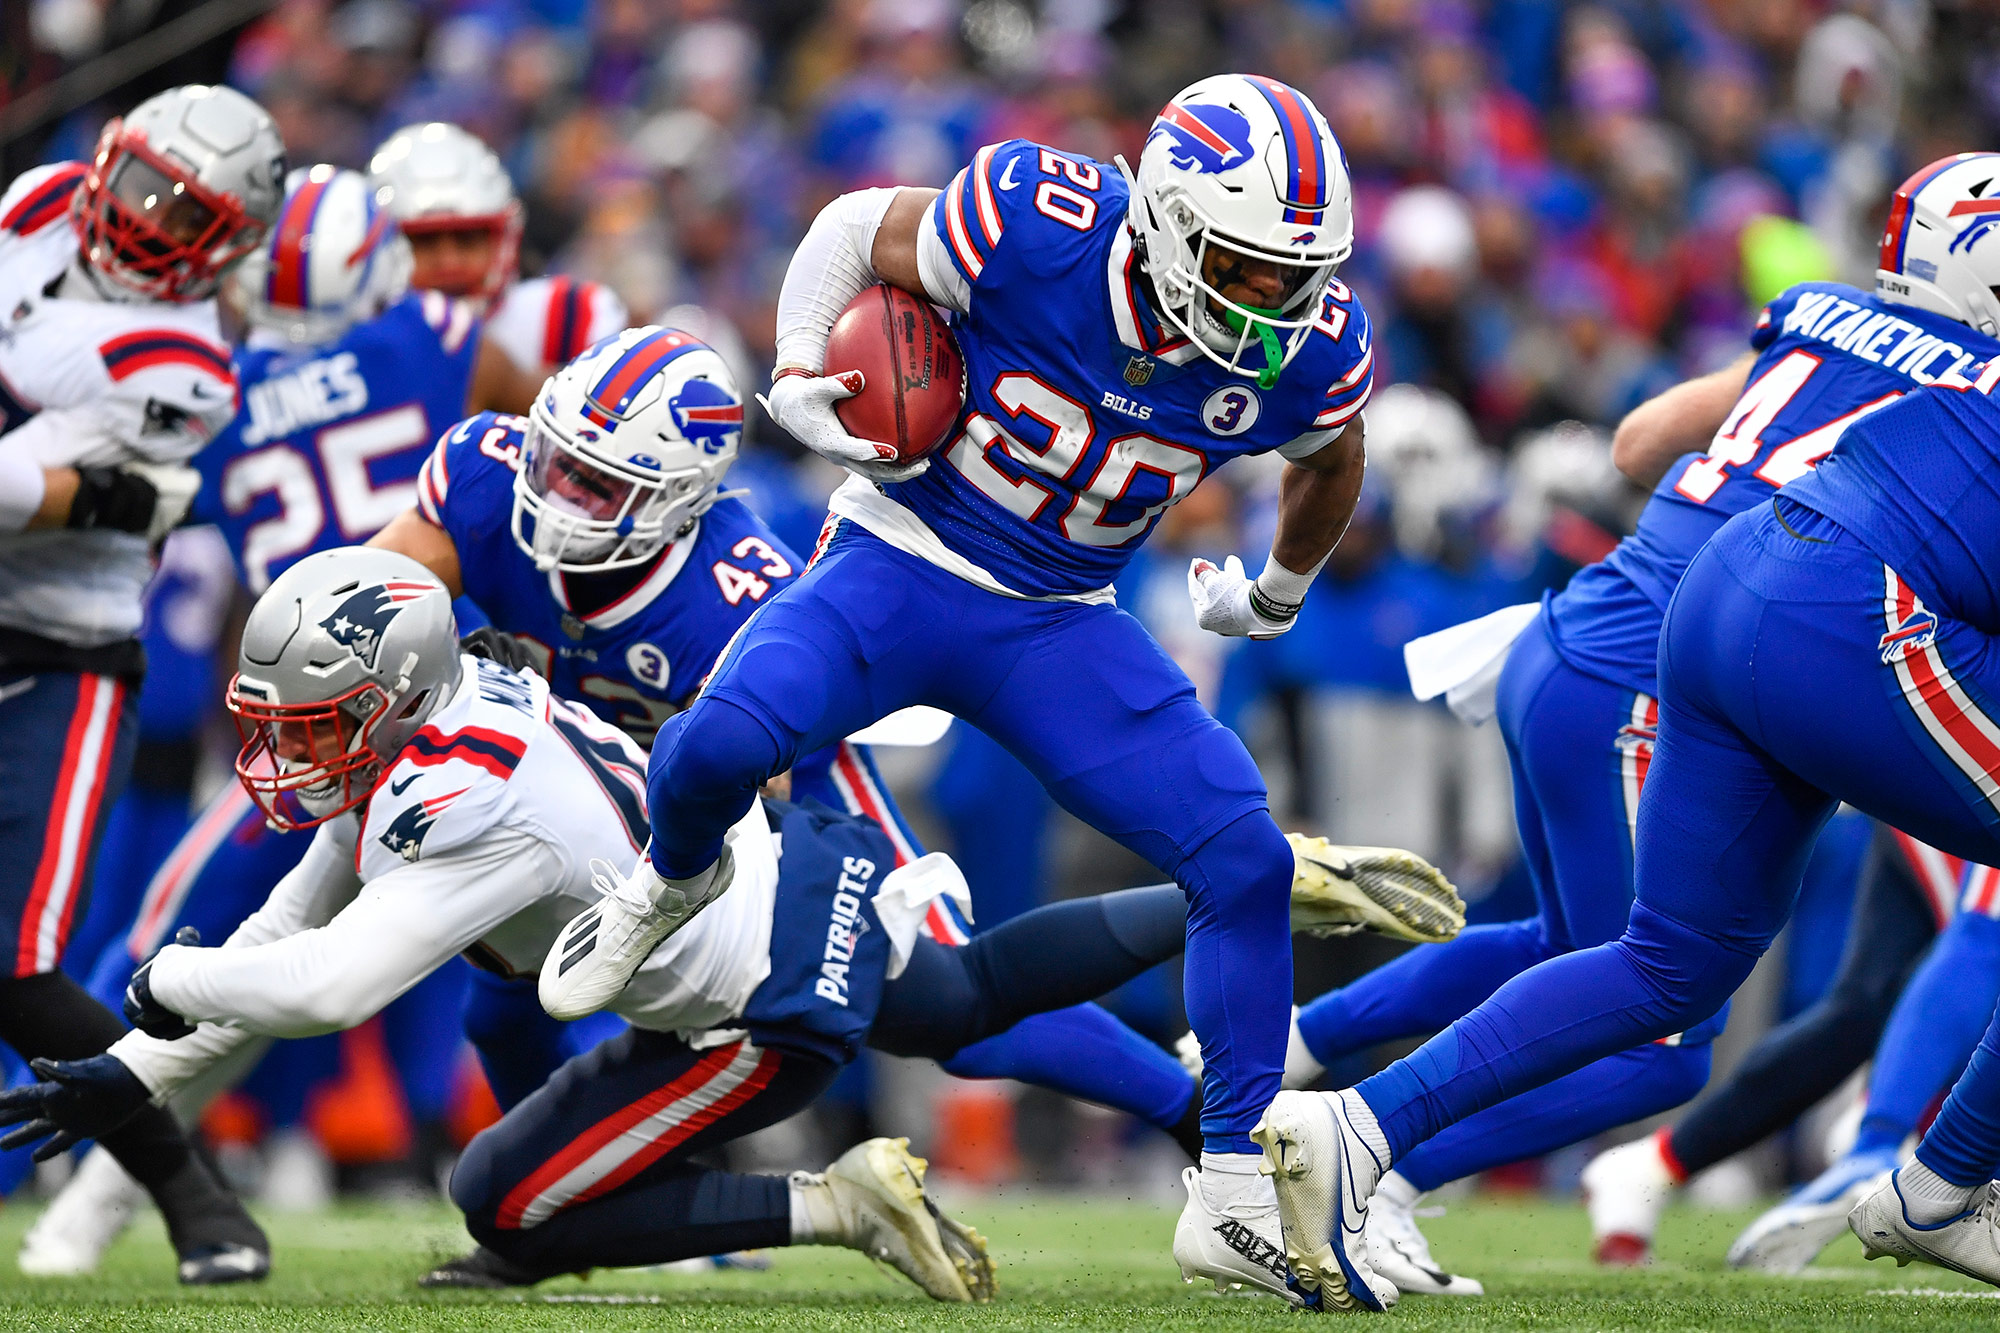 Buffalo Bills running back Nyheim Hines scored a first-half touchdown against the New England Patriots on Sunday. 